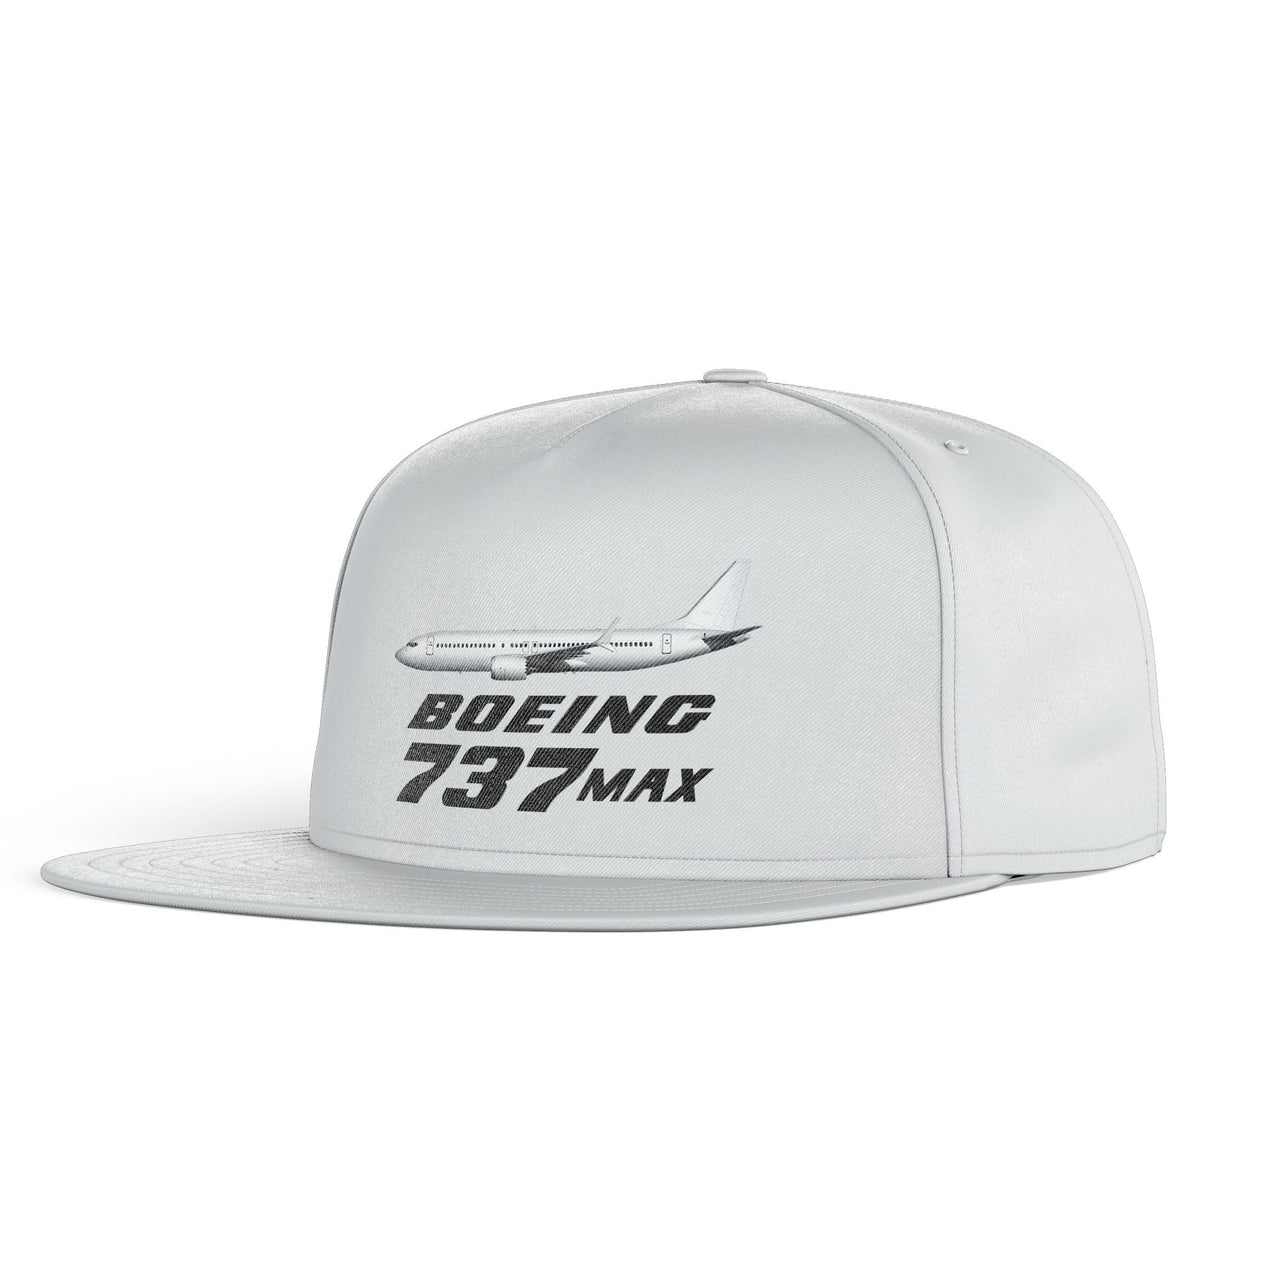 The Boeing 737Max Designed Snapback Caps & Hats